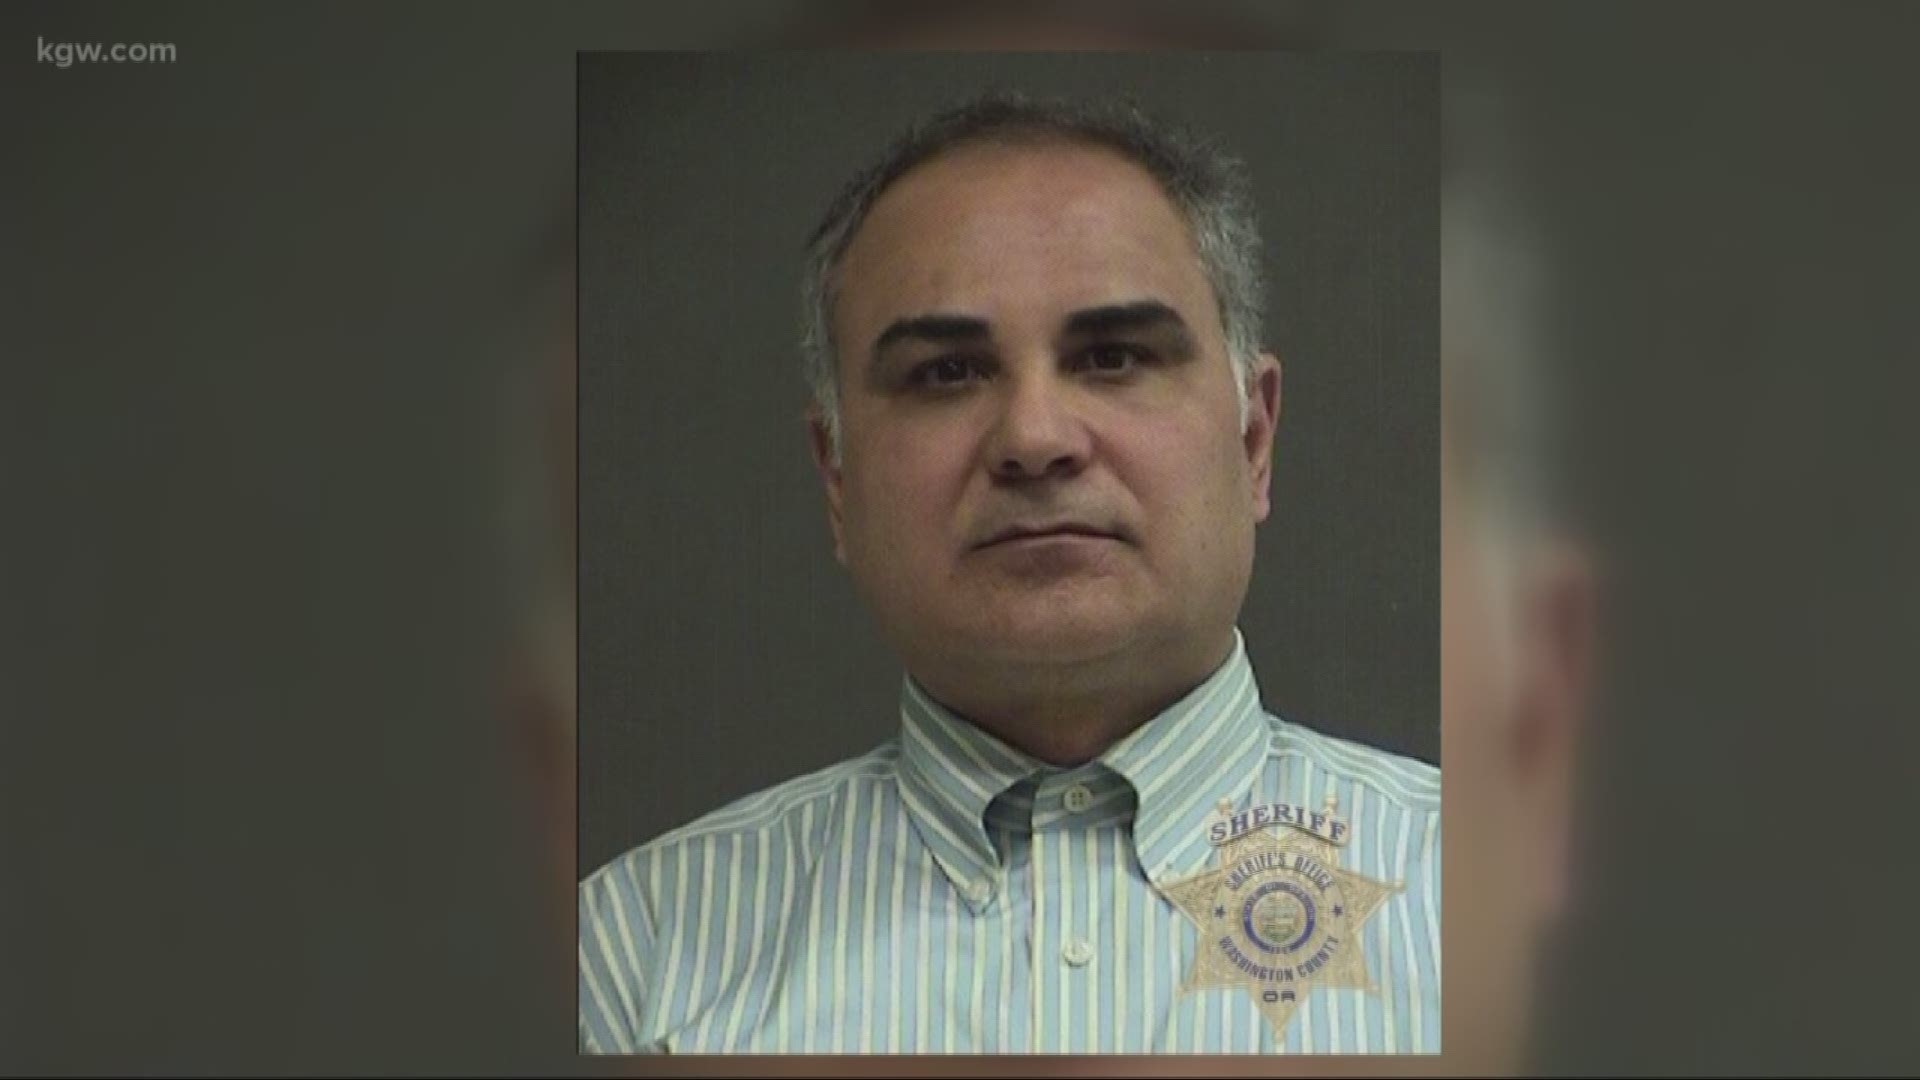 A cosmetic surgeon is accused of sexually abusing patients.